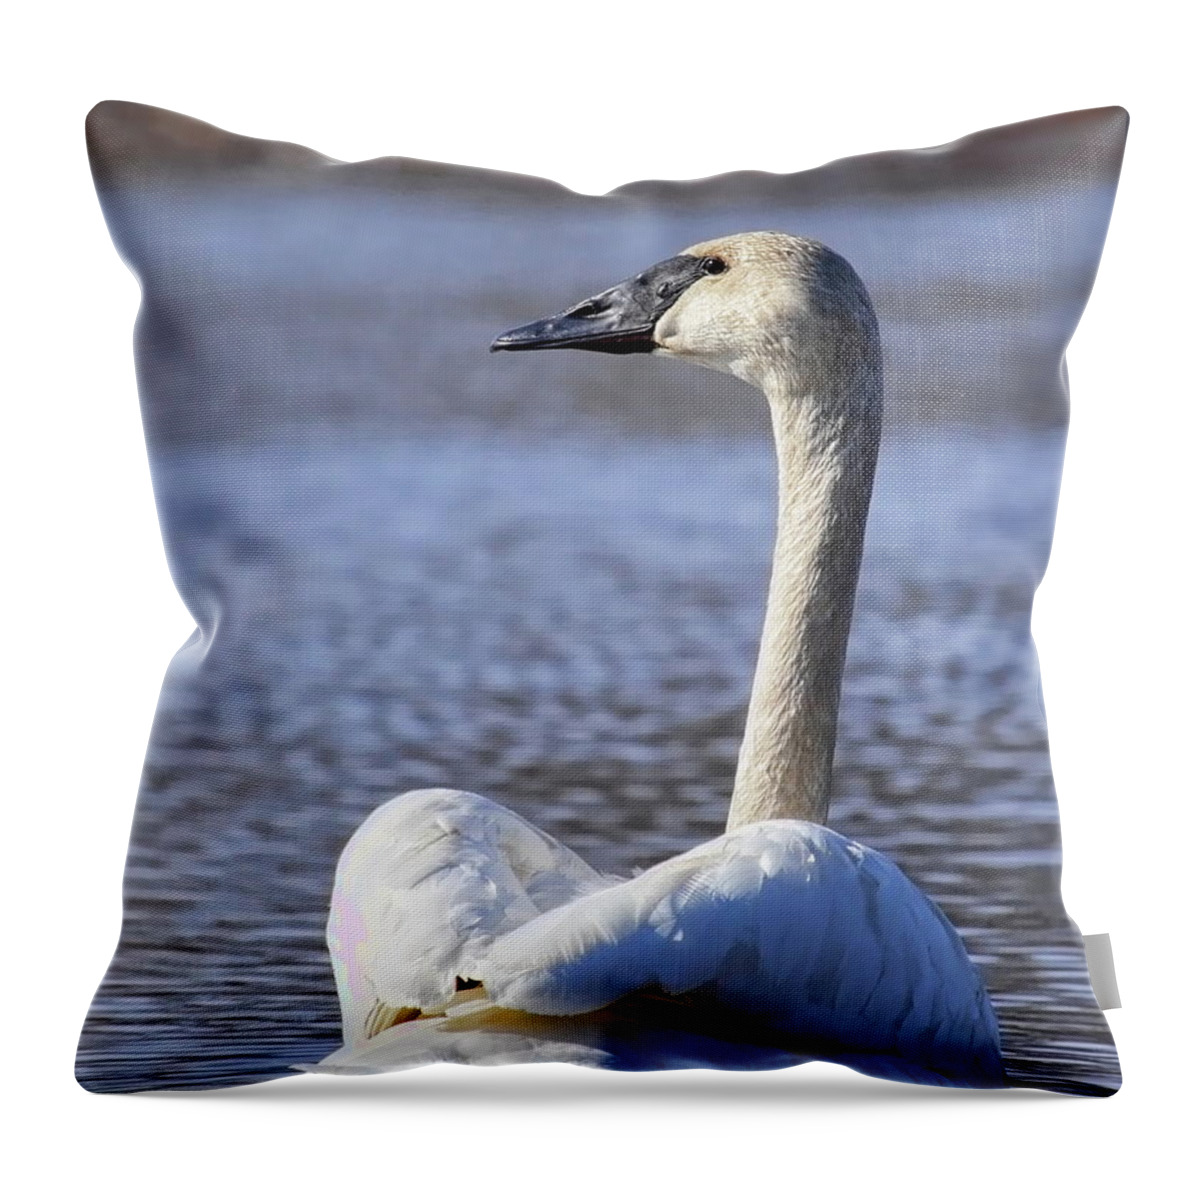 Waterfowl Throw Pillow featuring the photograph Watchful Trumpeter Swan by Dale Kauzlaric